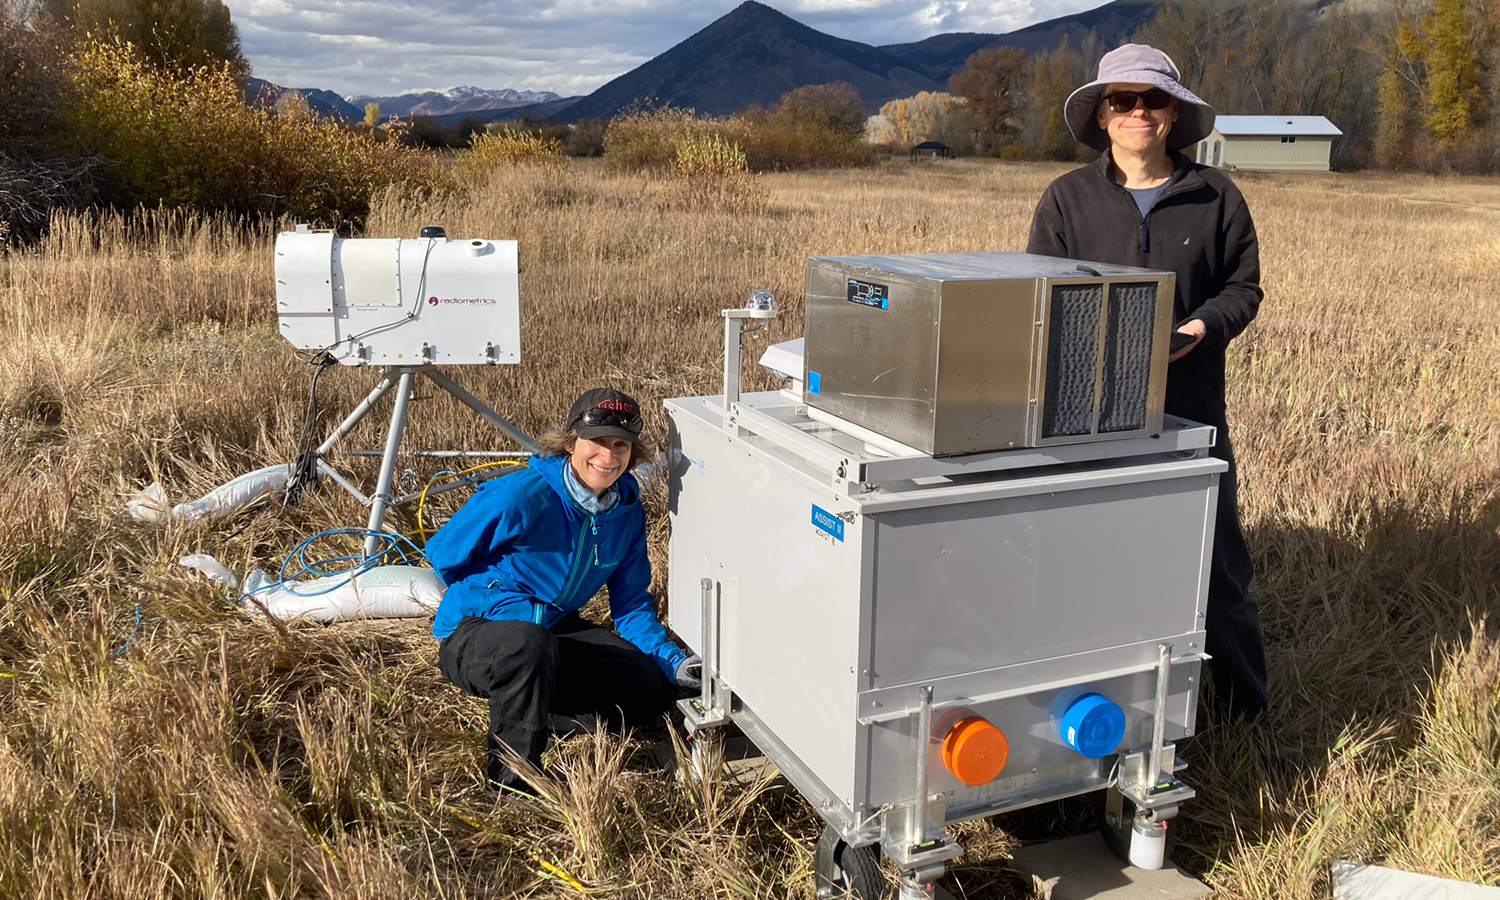 Two researchers install a microwave radiometer and ASSIST instrument at Roaring Judy field site